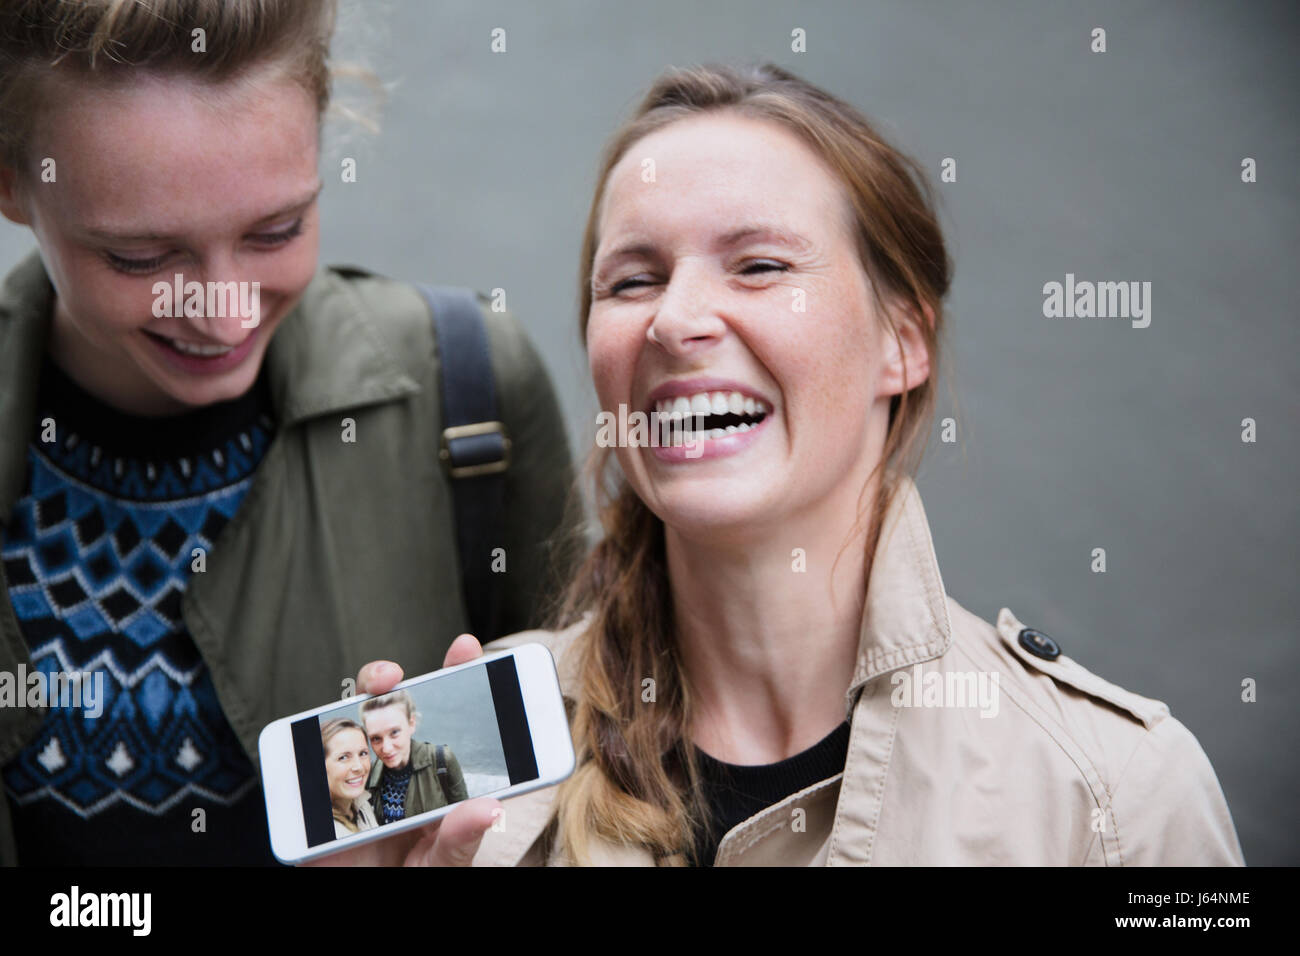 Laughing young women showing selfie photograph on smart phone Stock Photo